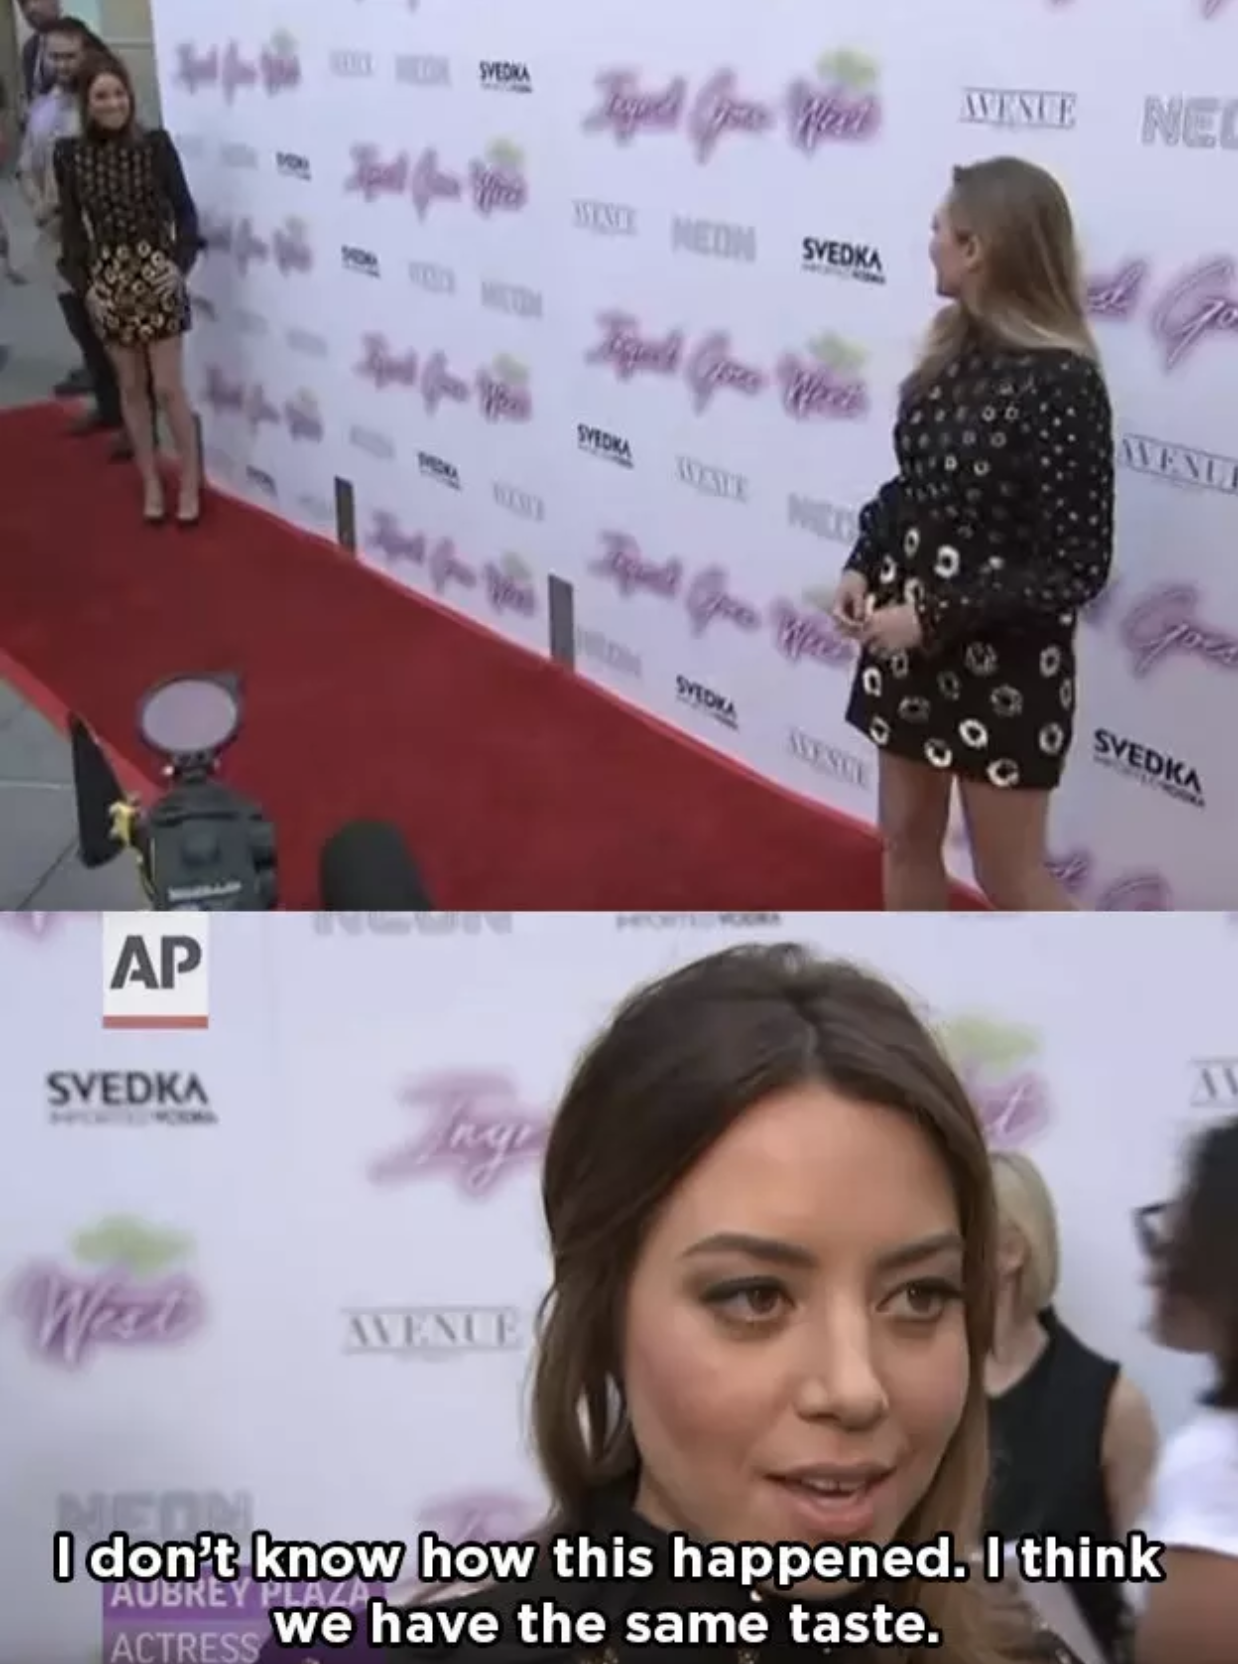 Elizabeth Olsen getting caught off guard with Aubrey showing up in her outfit on the red carpet